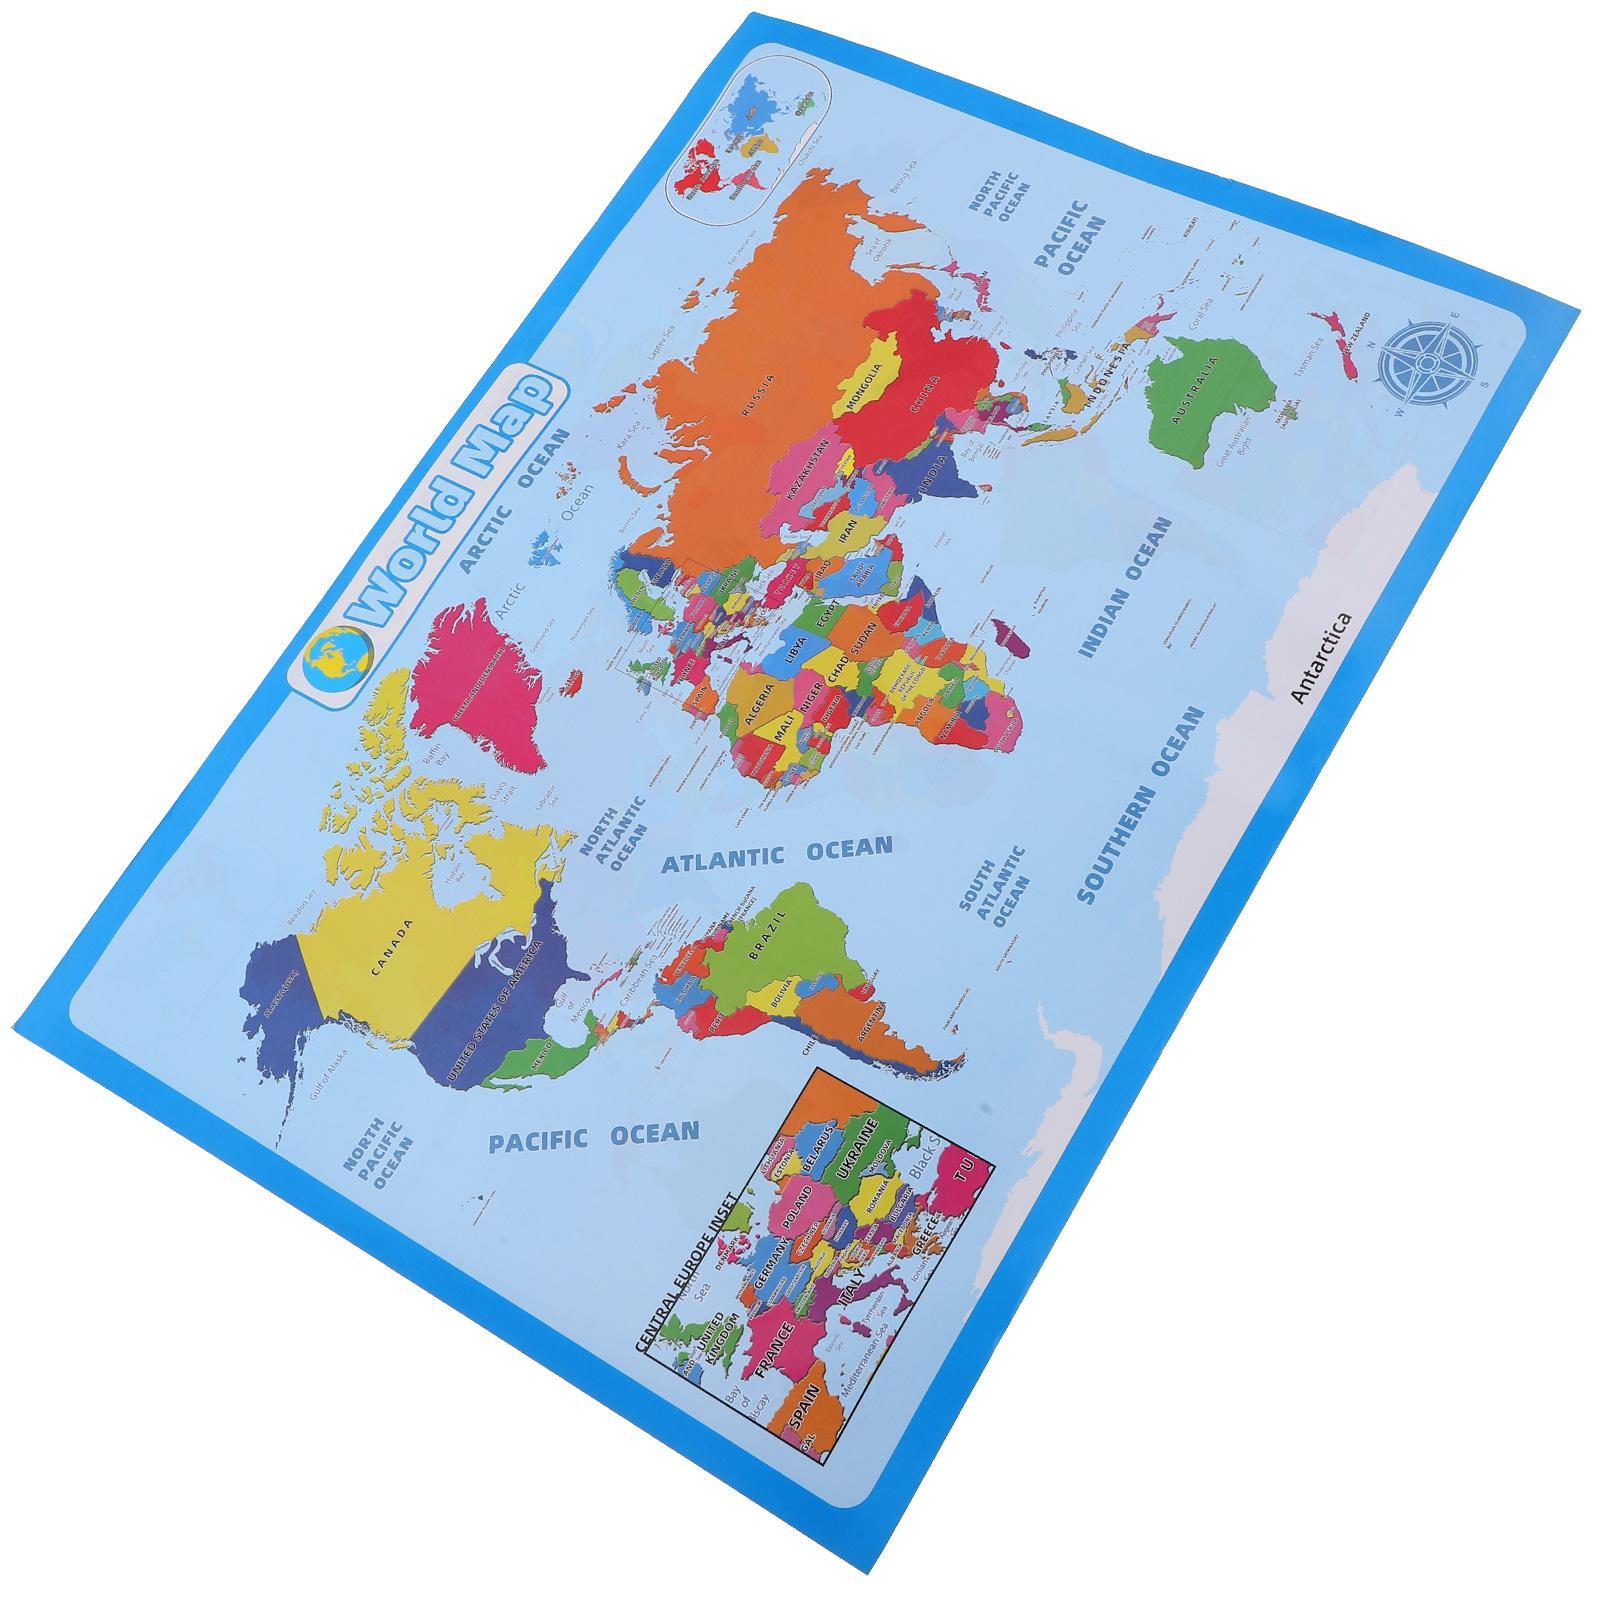 Laminated World Map Flip Chart Kids Learning Big Poster The Maps Child Toddler